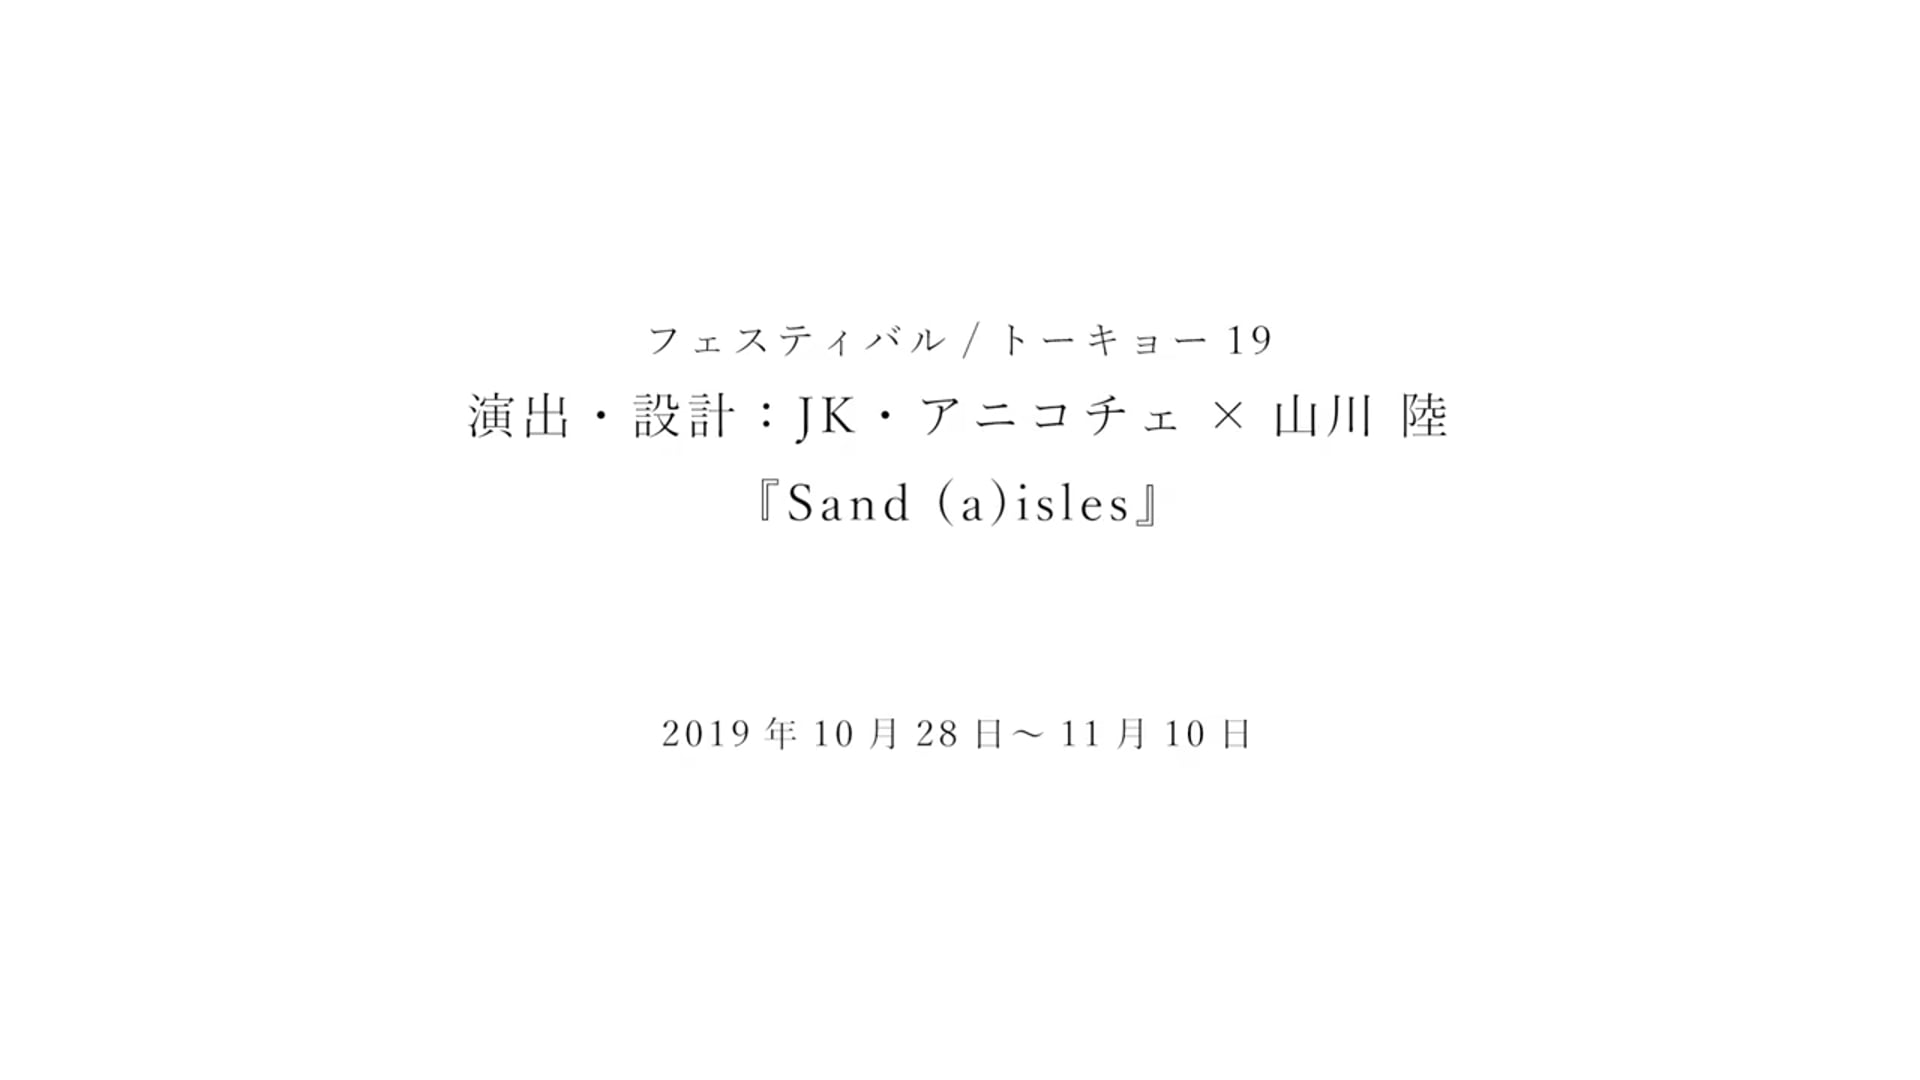 SAND (A)ISLES Project, Festival/Tokyo